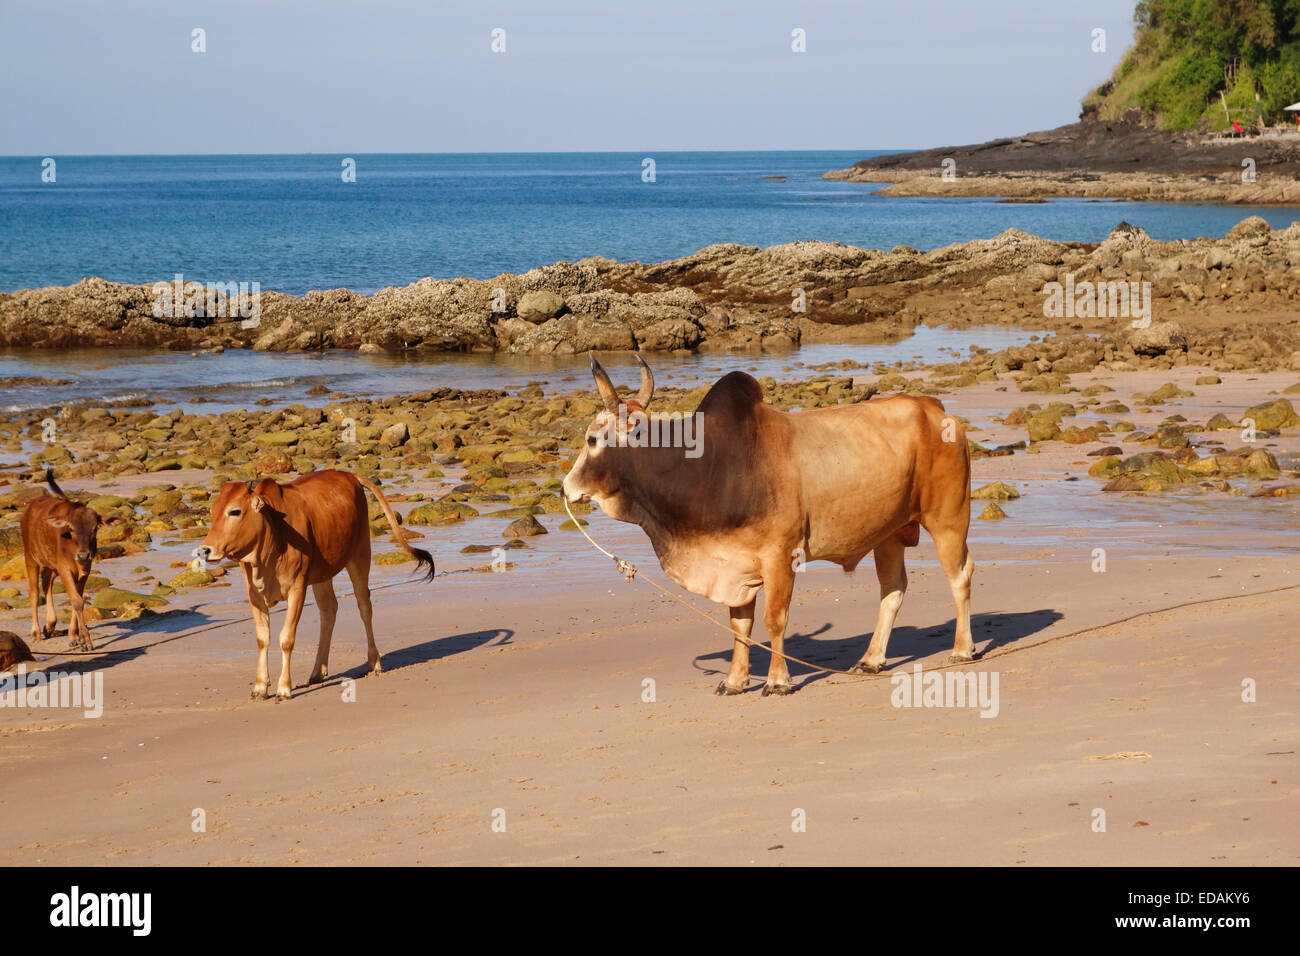 Bull and cows of Asian Cattle breed on beach. Resort in background. Koh Ko Lanta, Thailand South-east Asia. Stock Photo